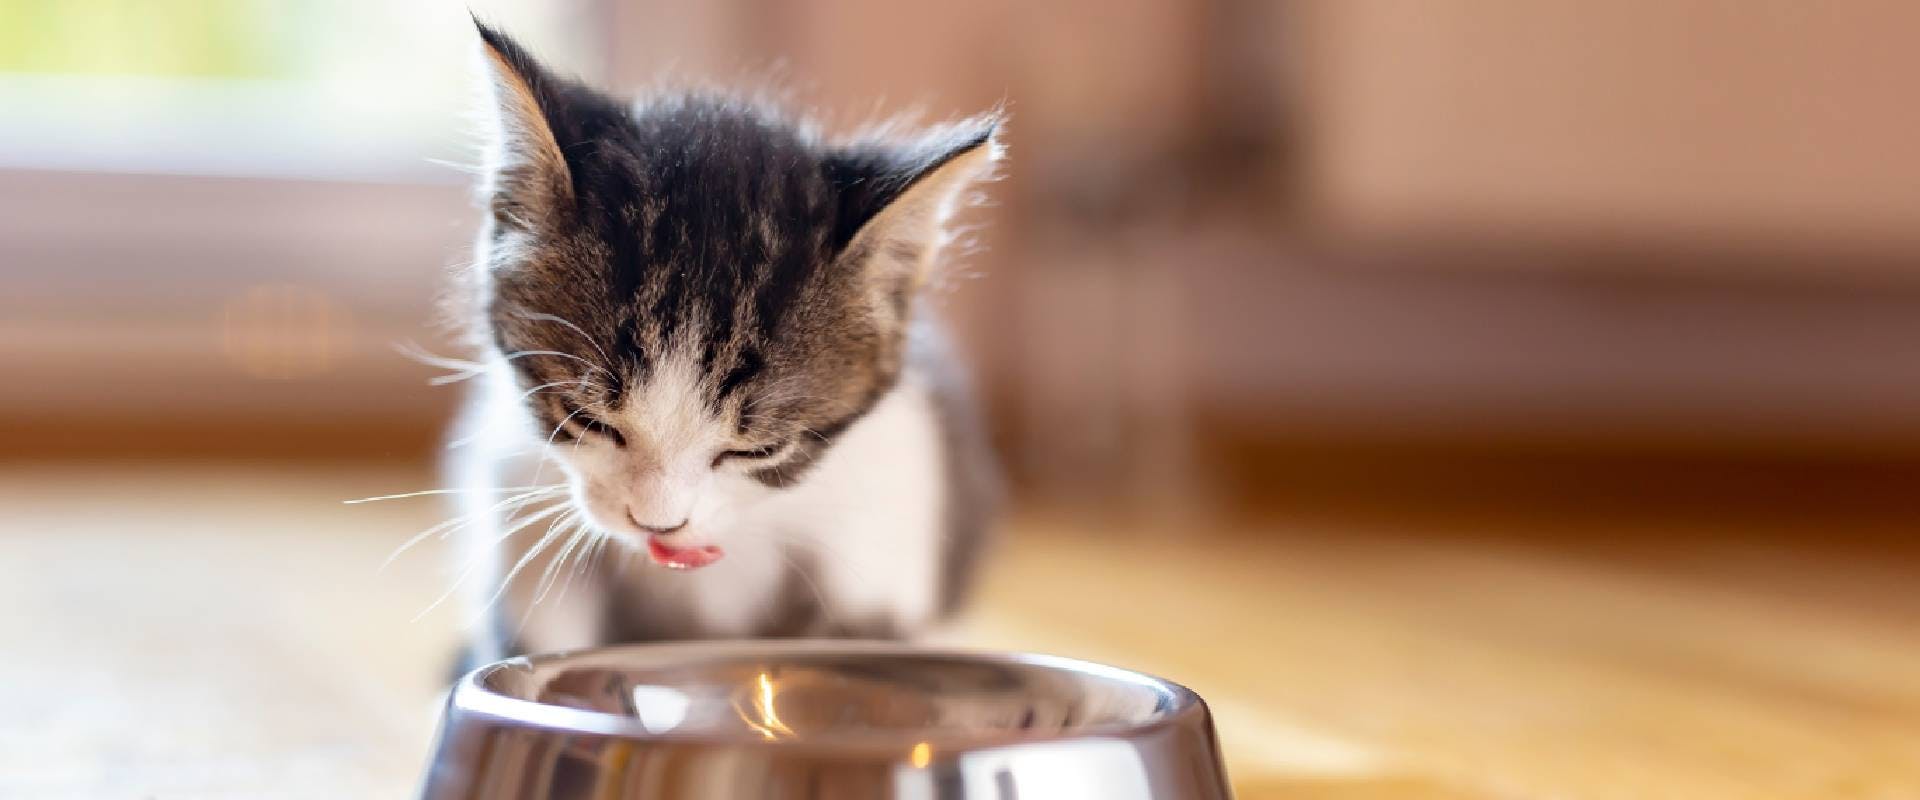 Kitten eating from a metal bowl